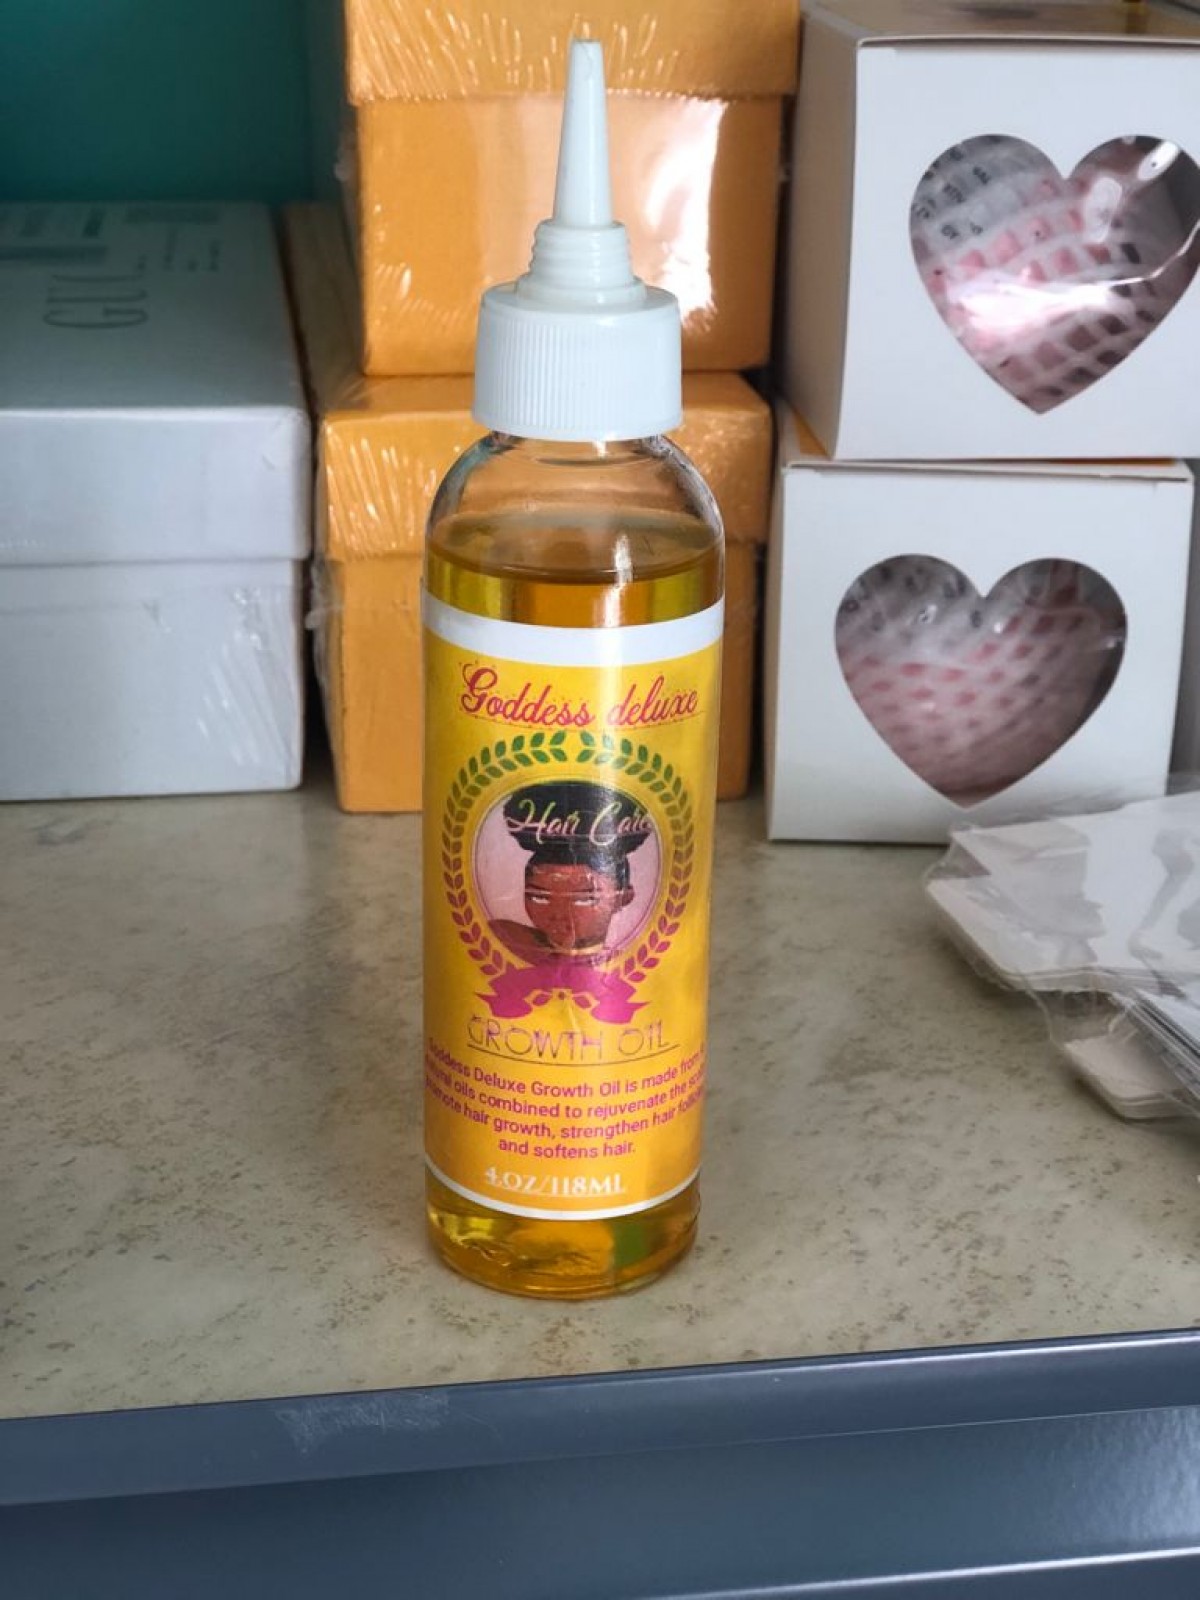 HAIR Growth Oil for sale in Montego Bay St James - Hair Products